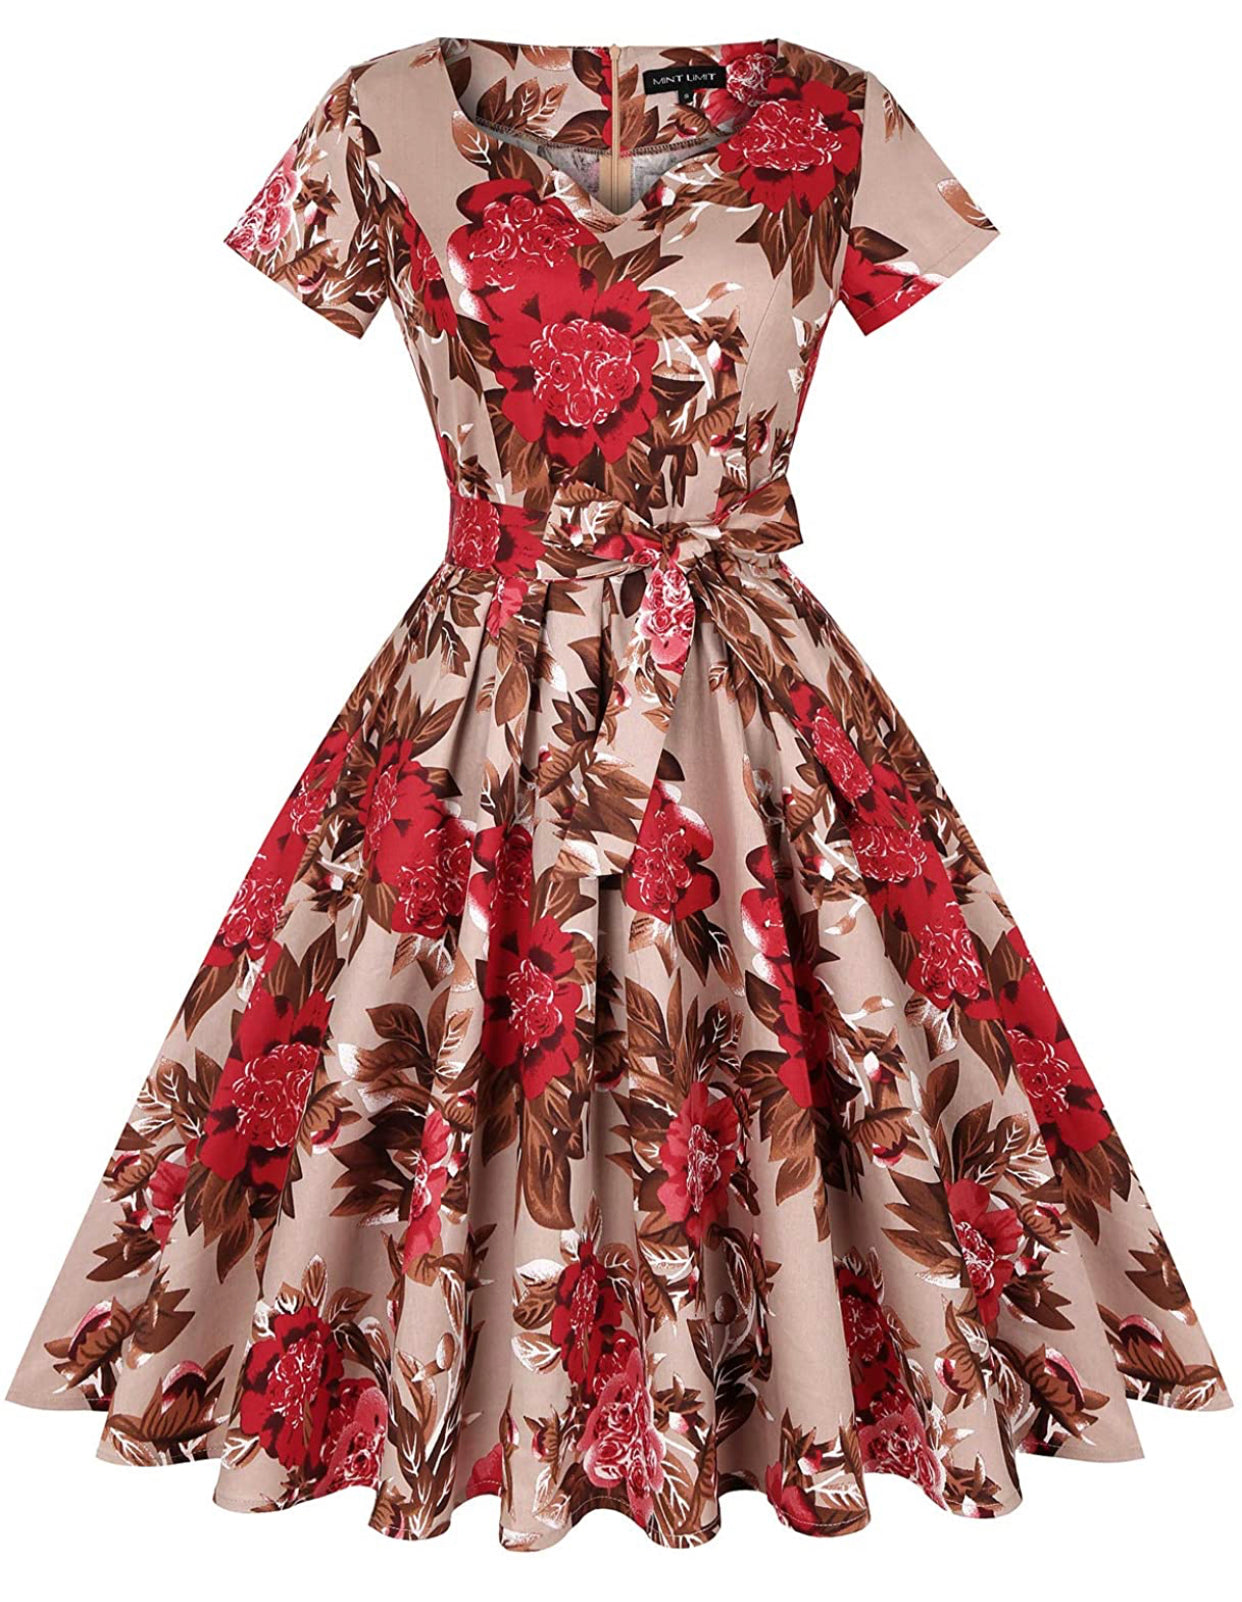 Vintage Inspired Brown Floral Print Dress, Sizes Small - 2XLarge (US S ...